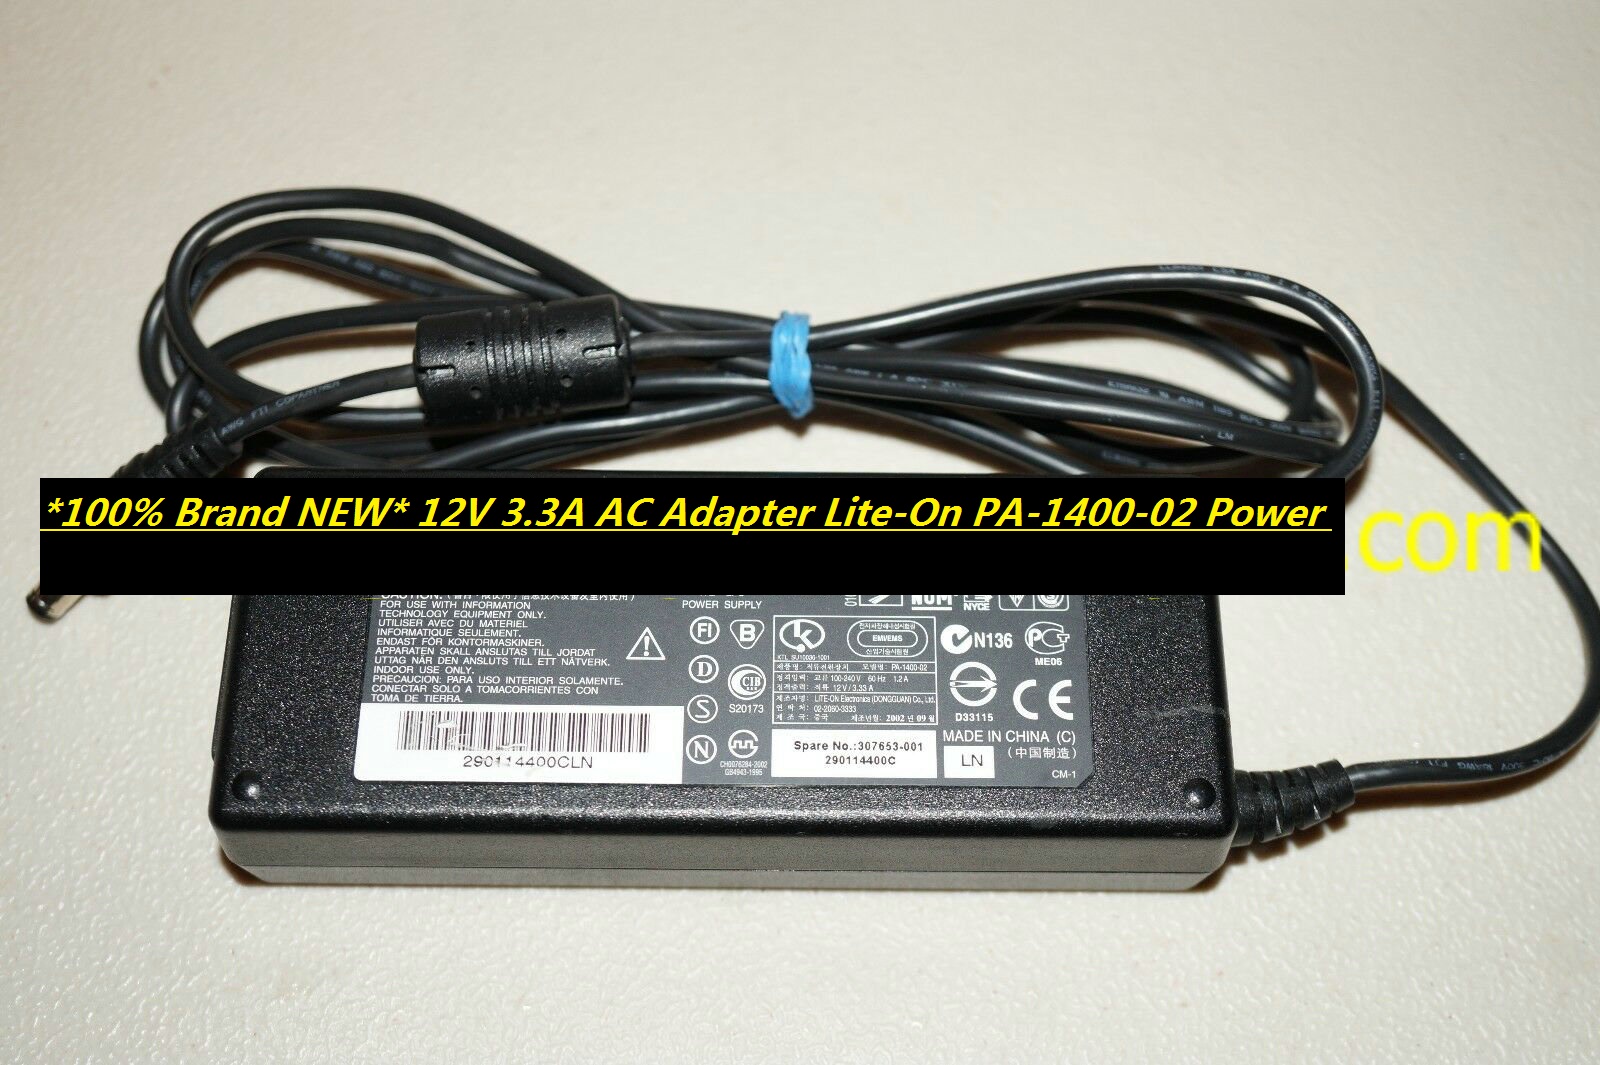 *100% Brand NEW* 12V 3.3A AC Adapter Lite-On PA-1400-02 Power Supply